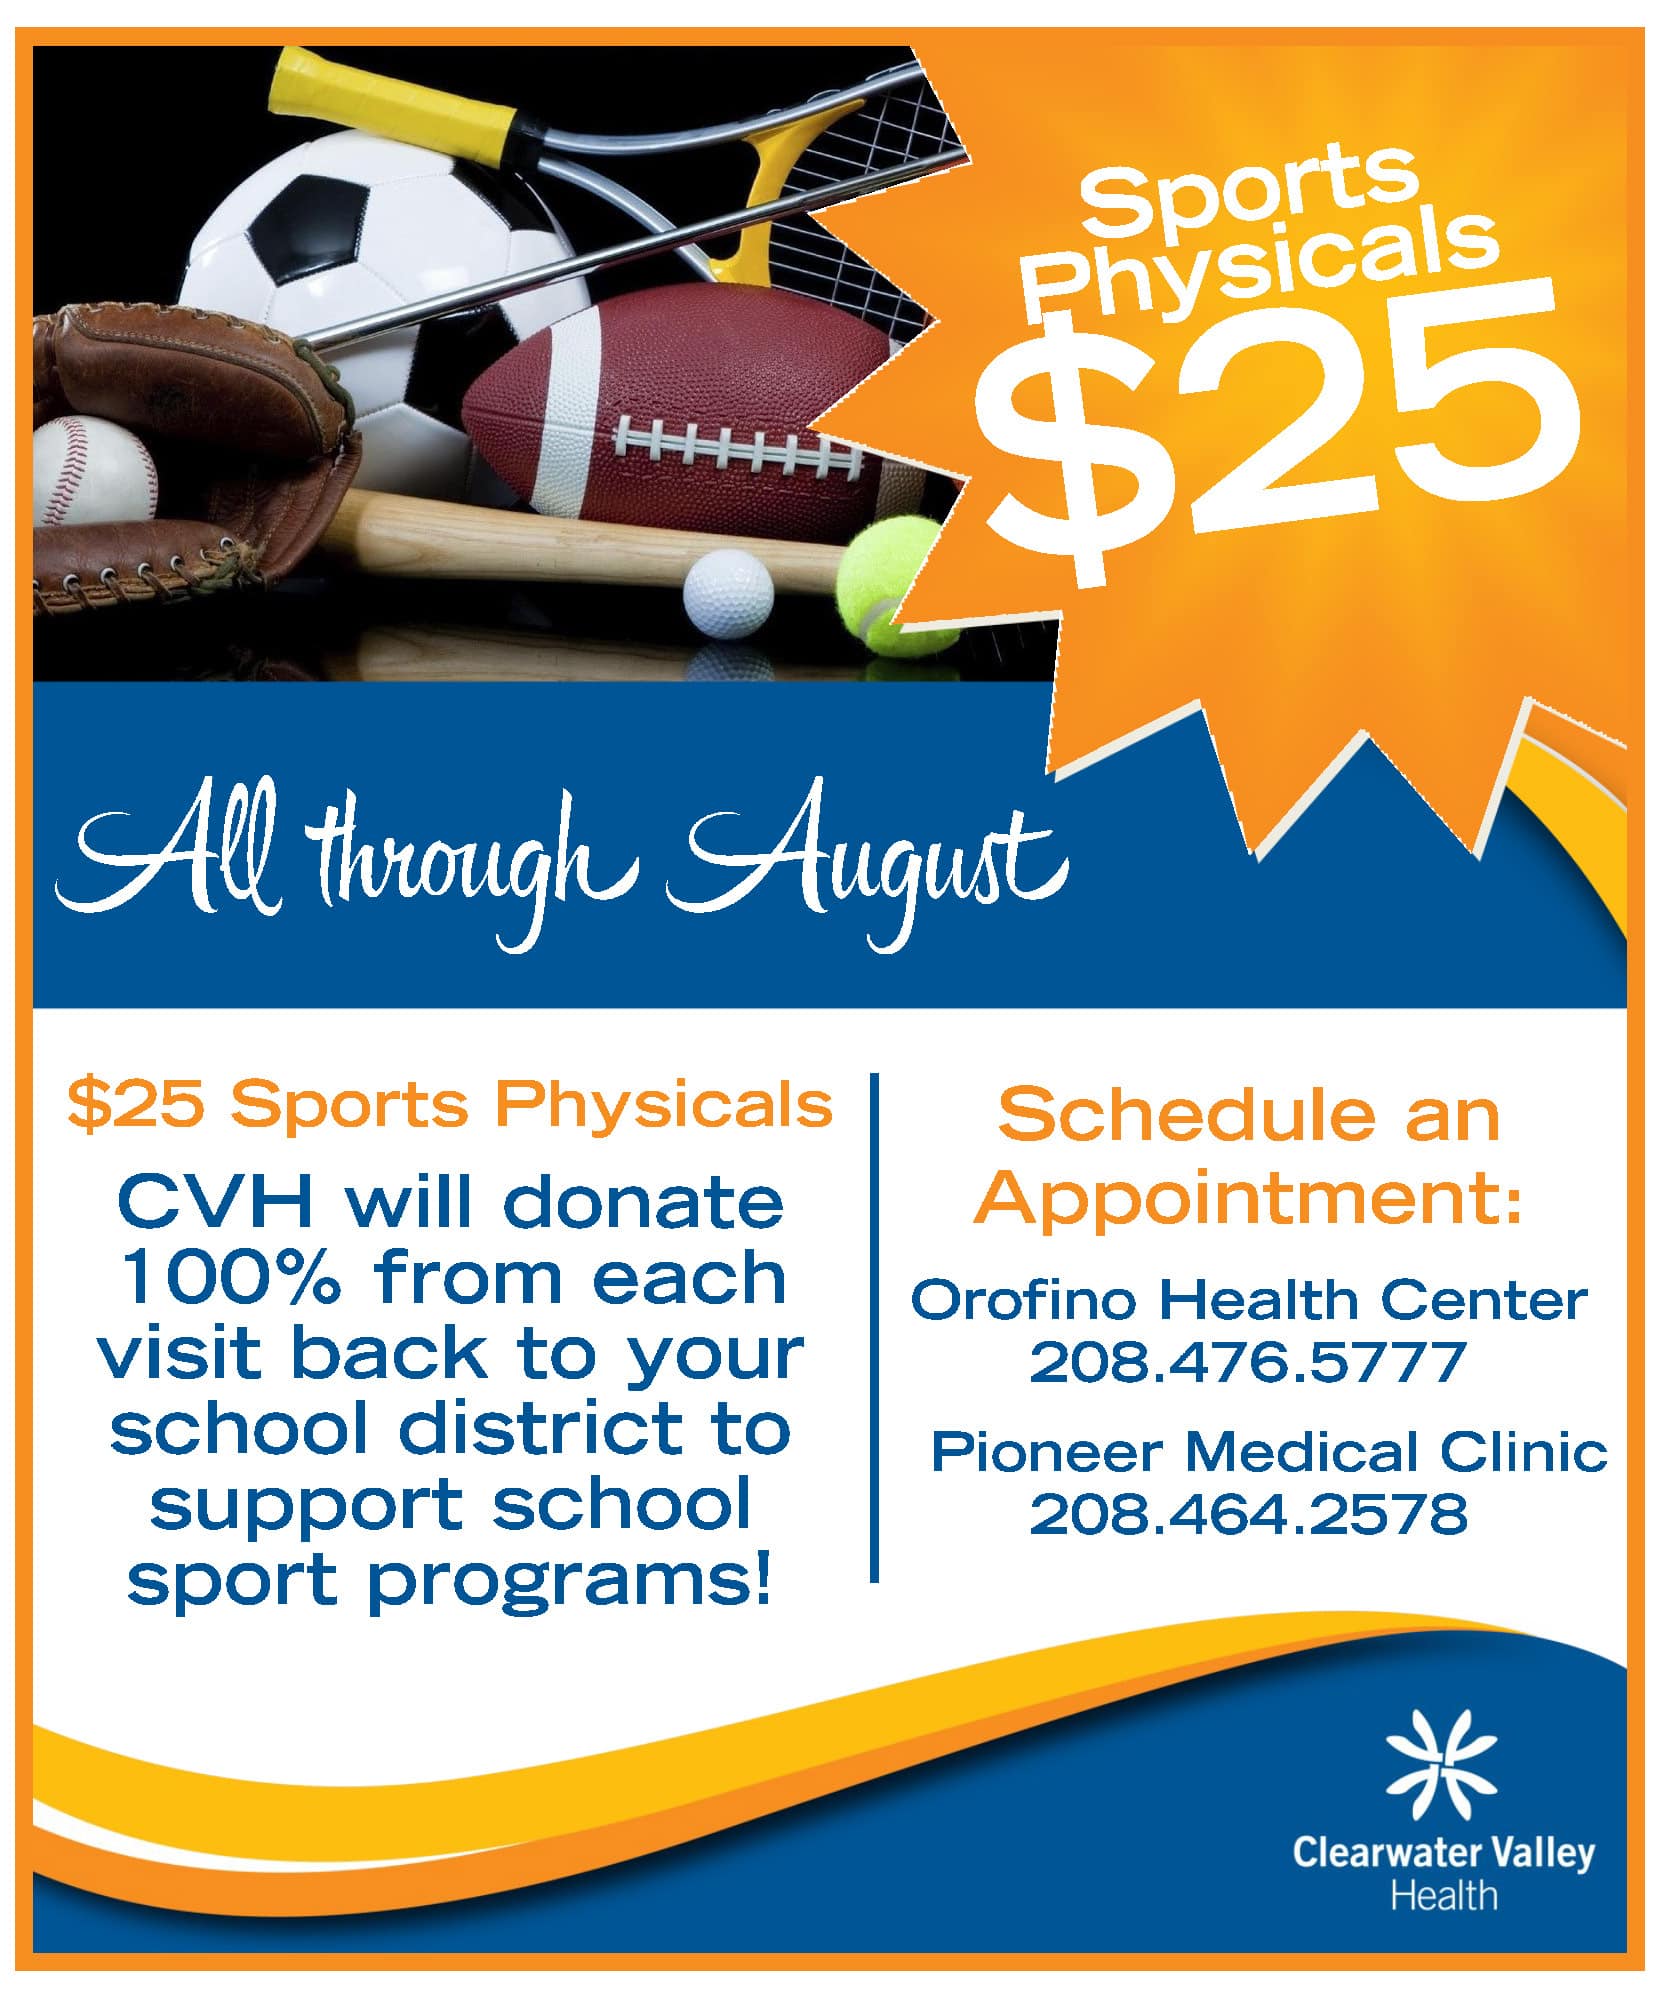 Sports Physicals Ad 2022